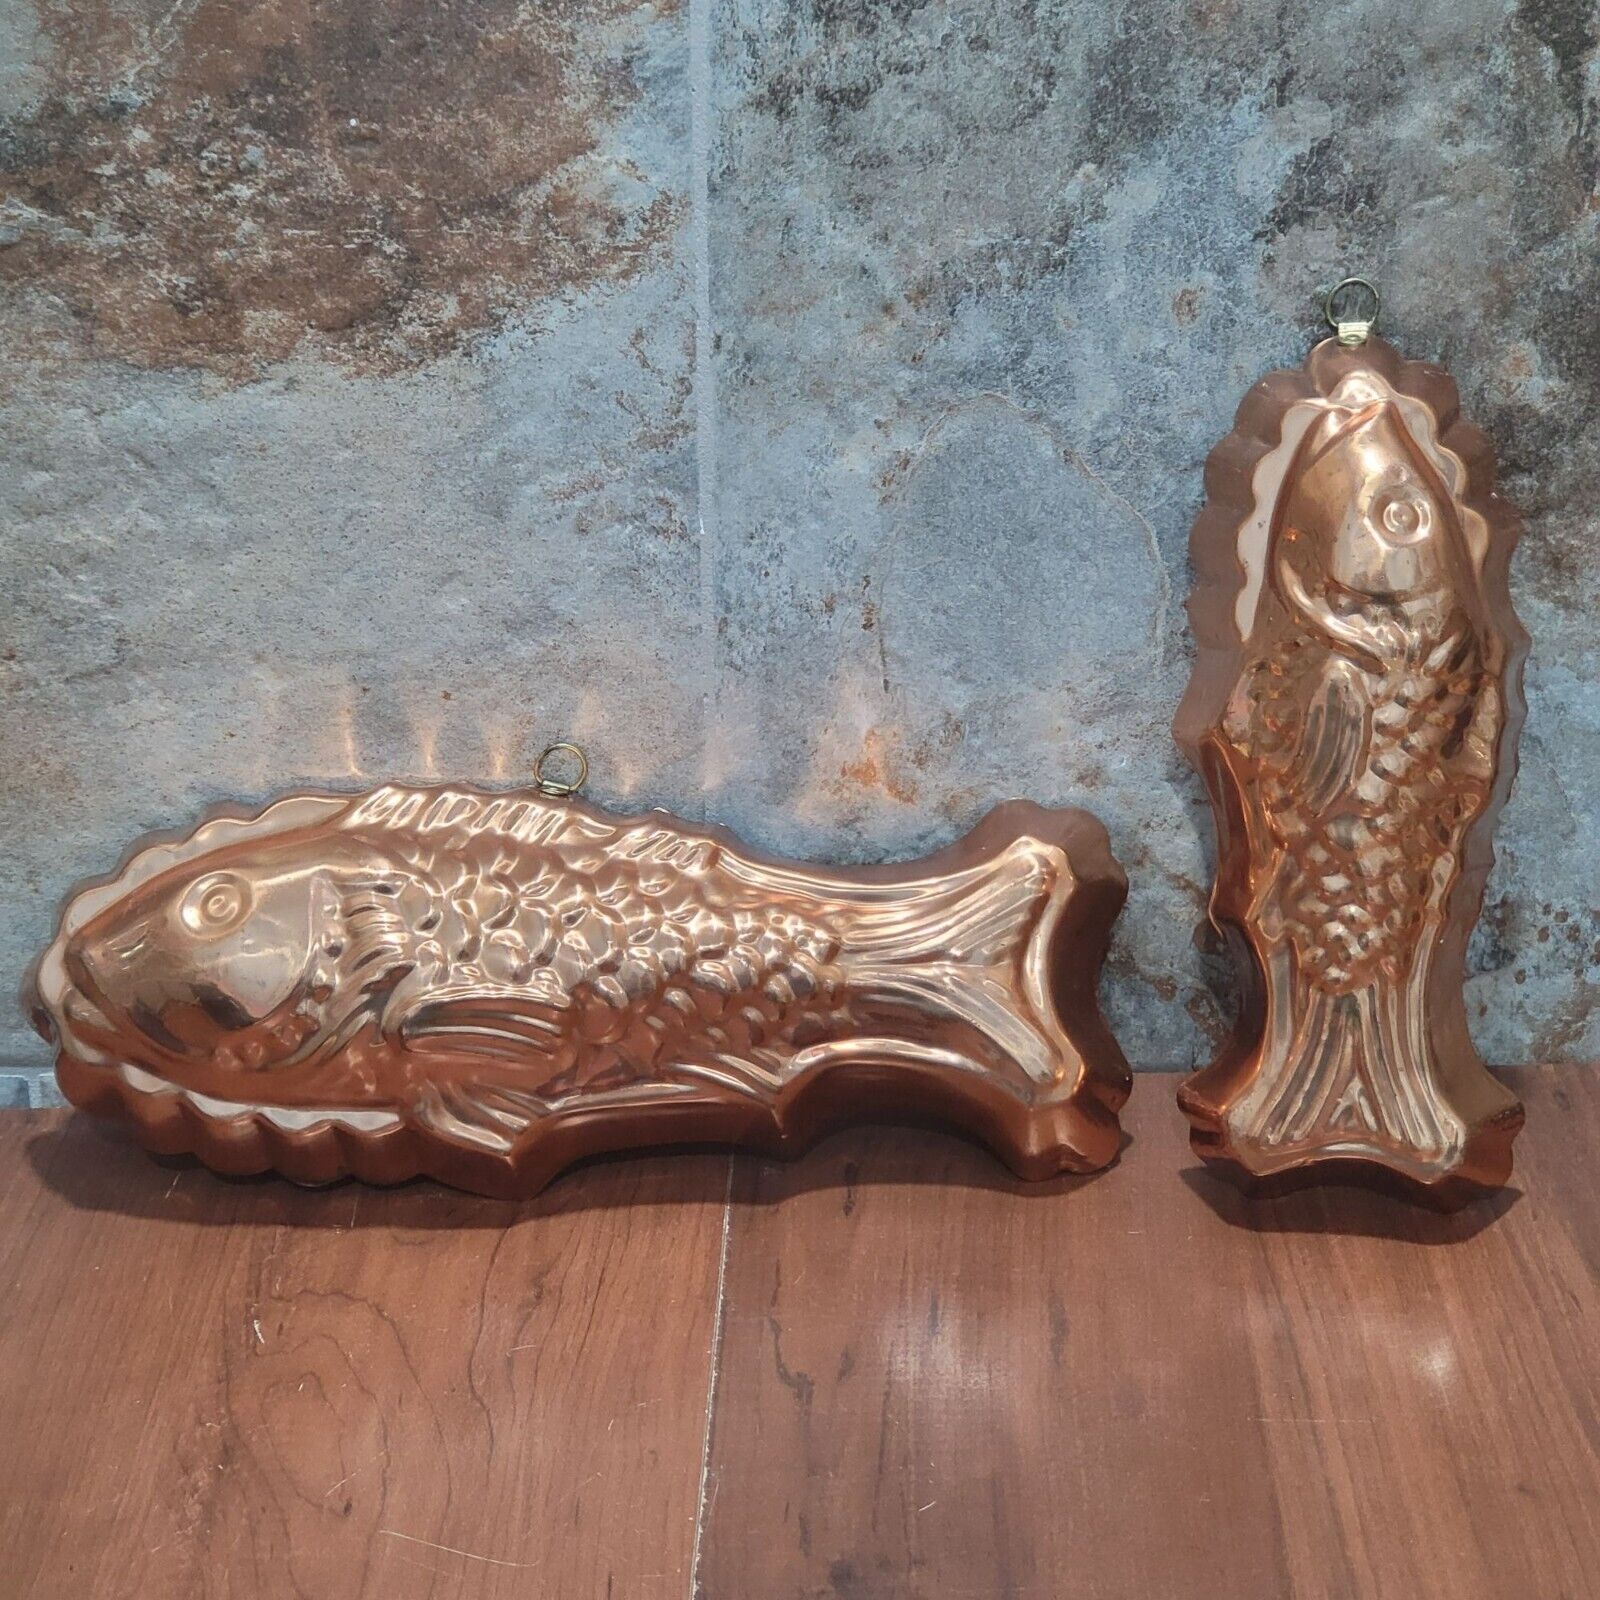 Vintage Tagus Portugal Copper Fish Mold Kitchen Decor Wall Hanging Set of 2